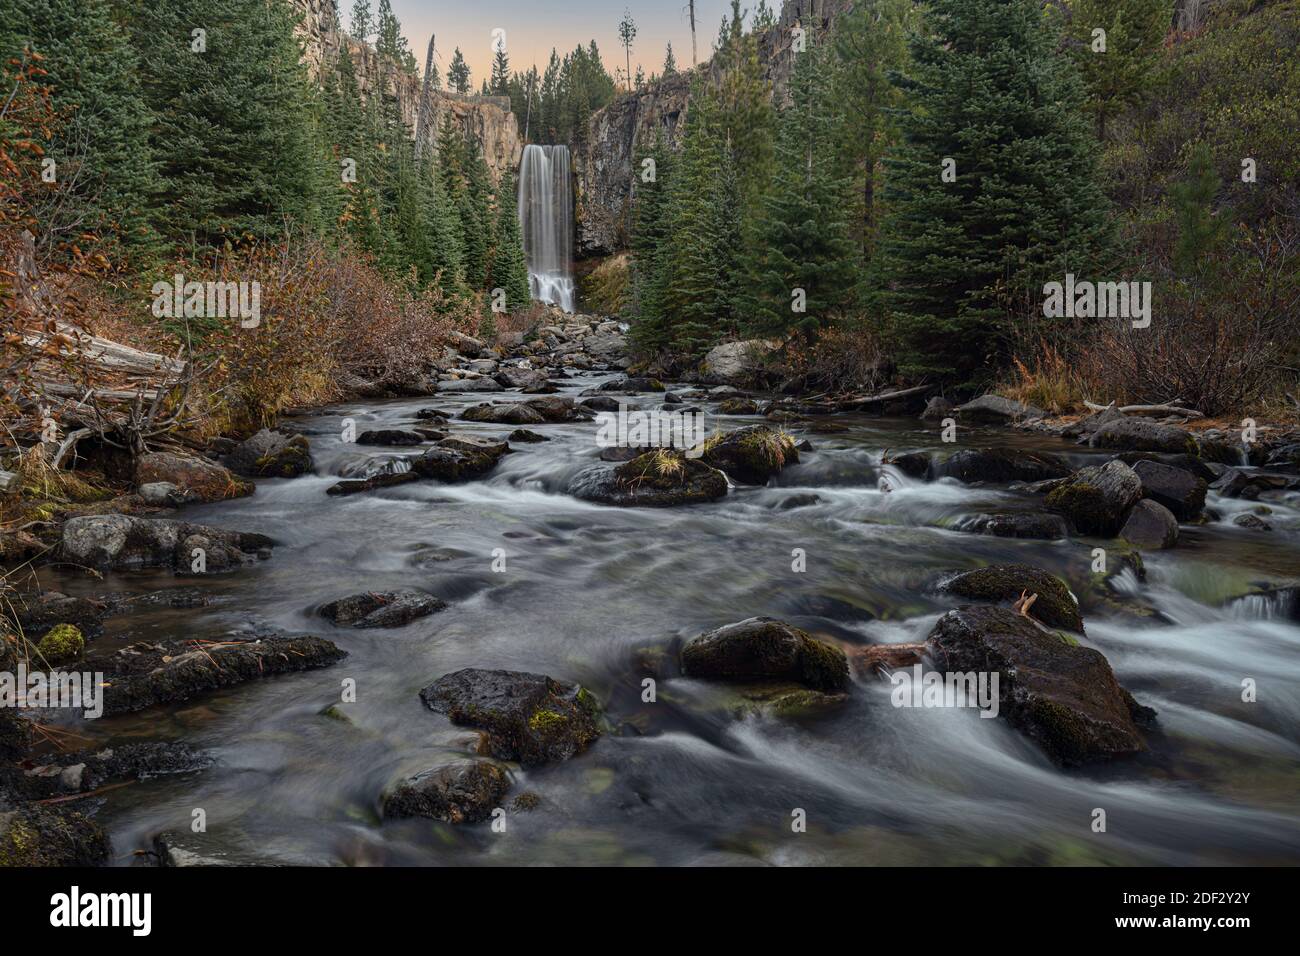 Tumalo Falls and Tumalo River in the Deschutes National Forest in Oregon Stock Photo